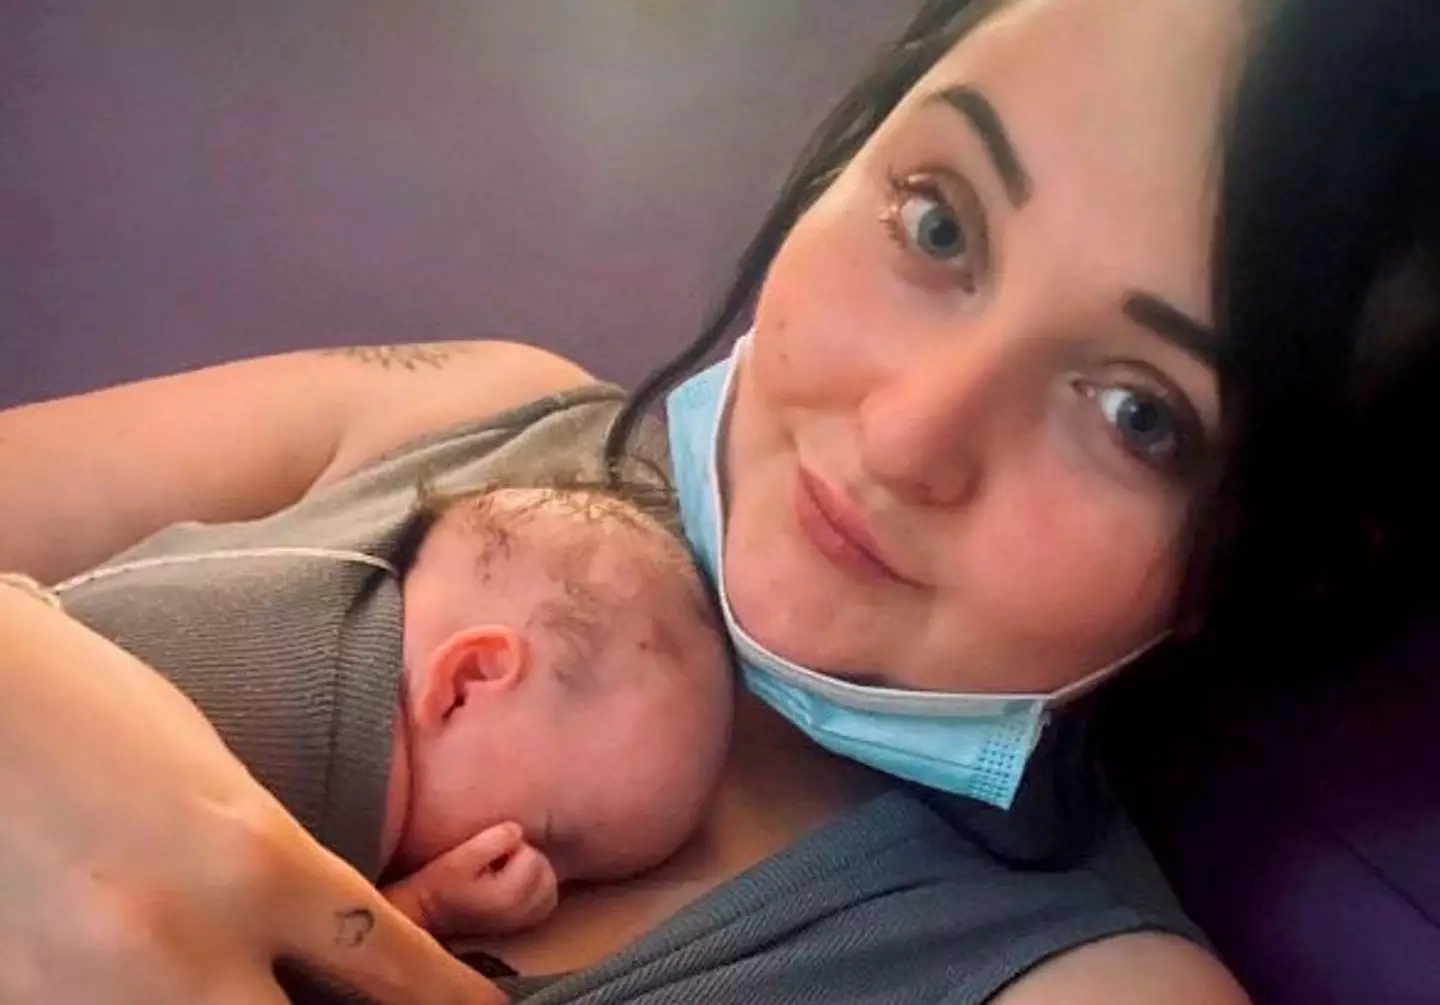 A woman who is mother to a terminally ill baby has been left heartbroken by a nurse’s insensitive comment.